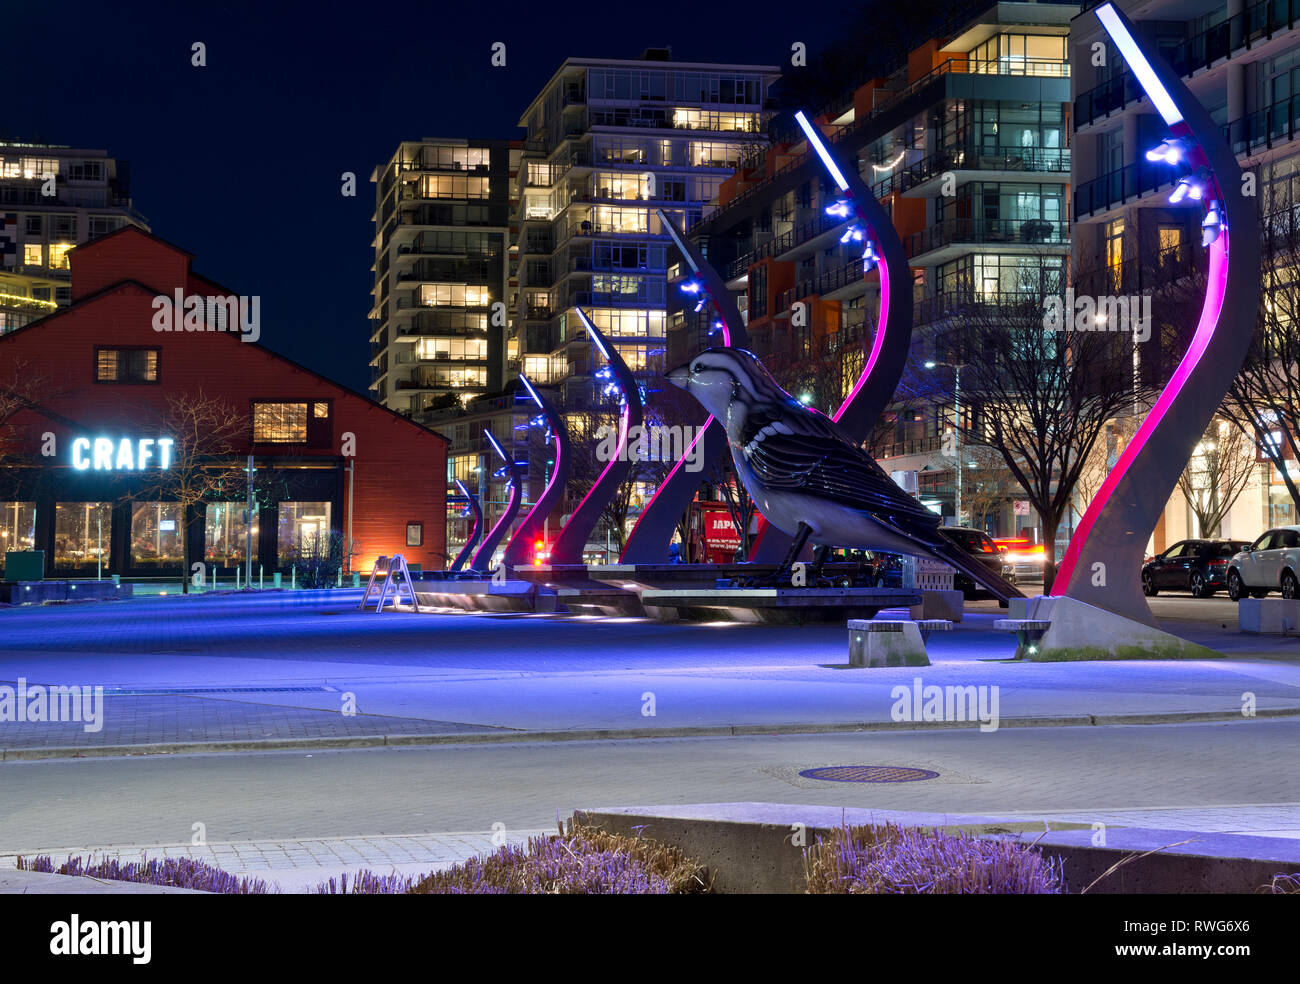 Olympic Village Square in Vancouver Canada at Night, with large bird sculpture and craft brewery. Vancouver's Olympic Village development. Stock Photo